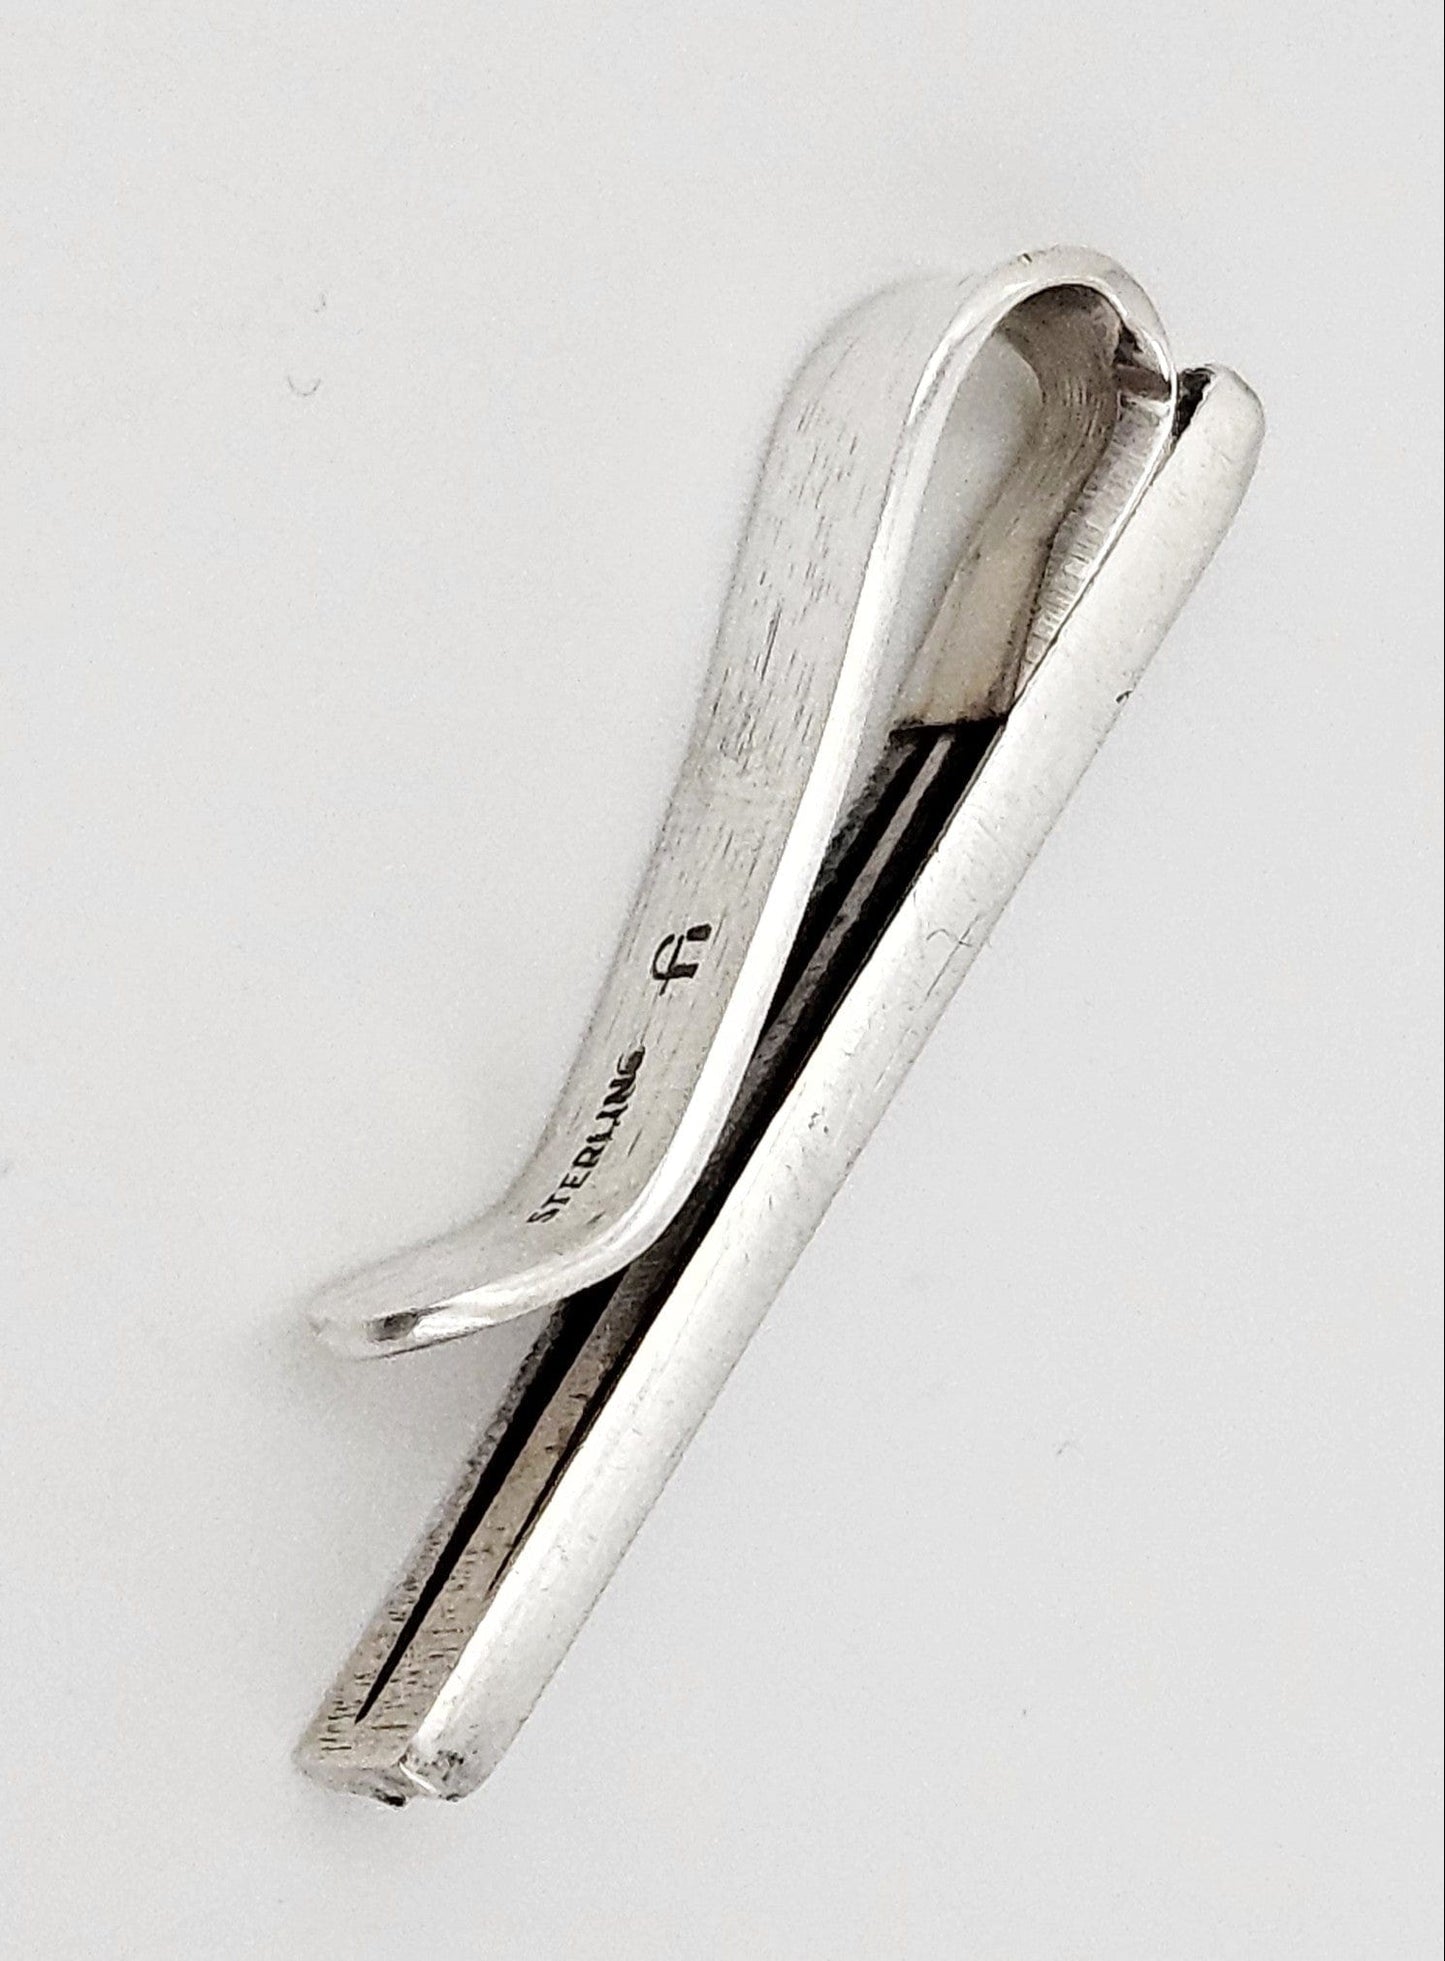 Harold Fithian Jewelry Superb Harold Fithian Sterling Abstract Modernist Money Tie Clip 1950/60s Rare